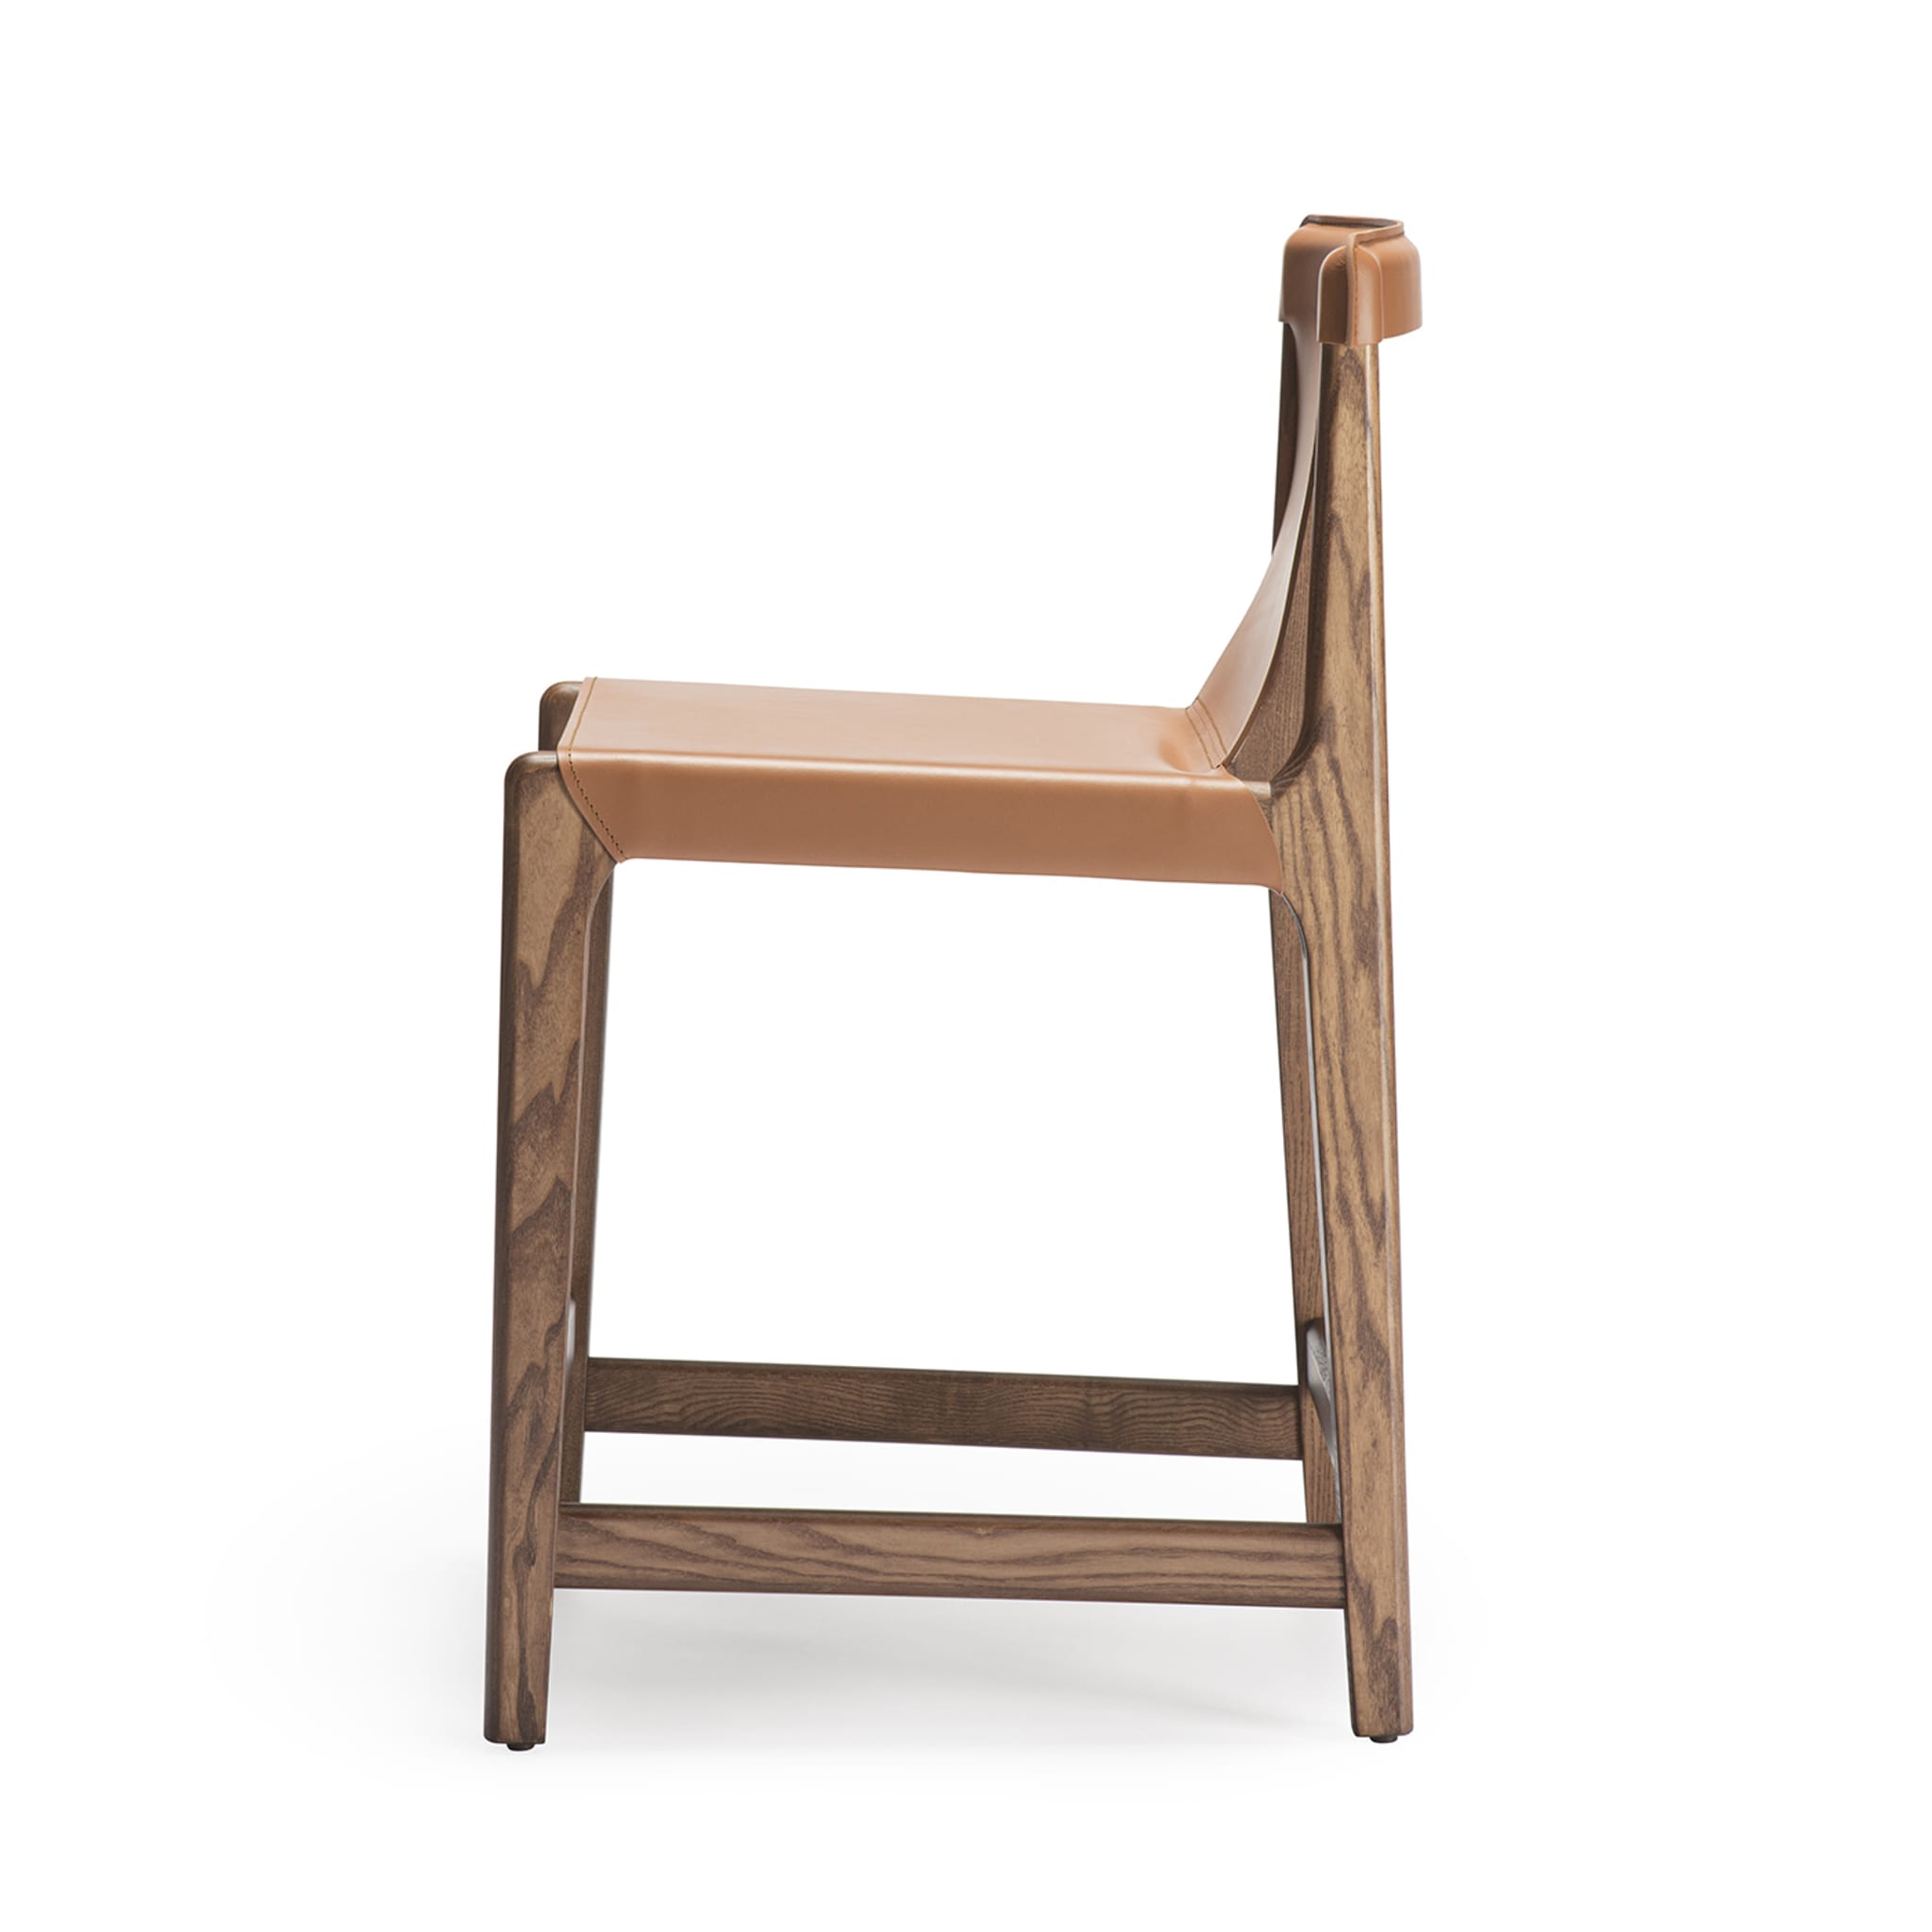 Burano/sg 24 Brown Leather Counter Stool by Balutto Associati - Alternative view 1